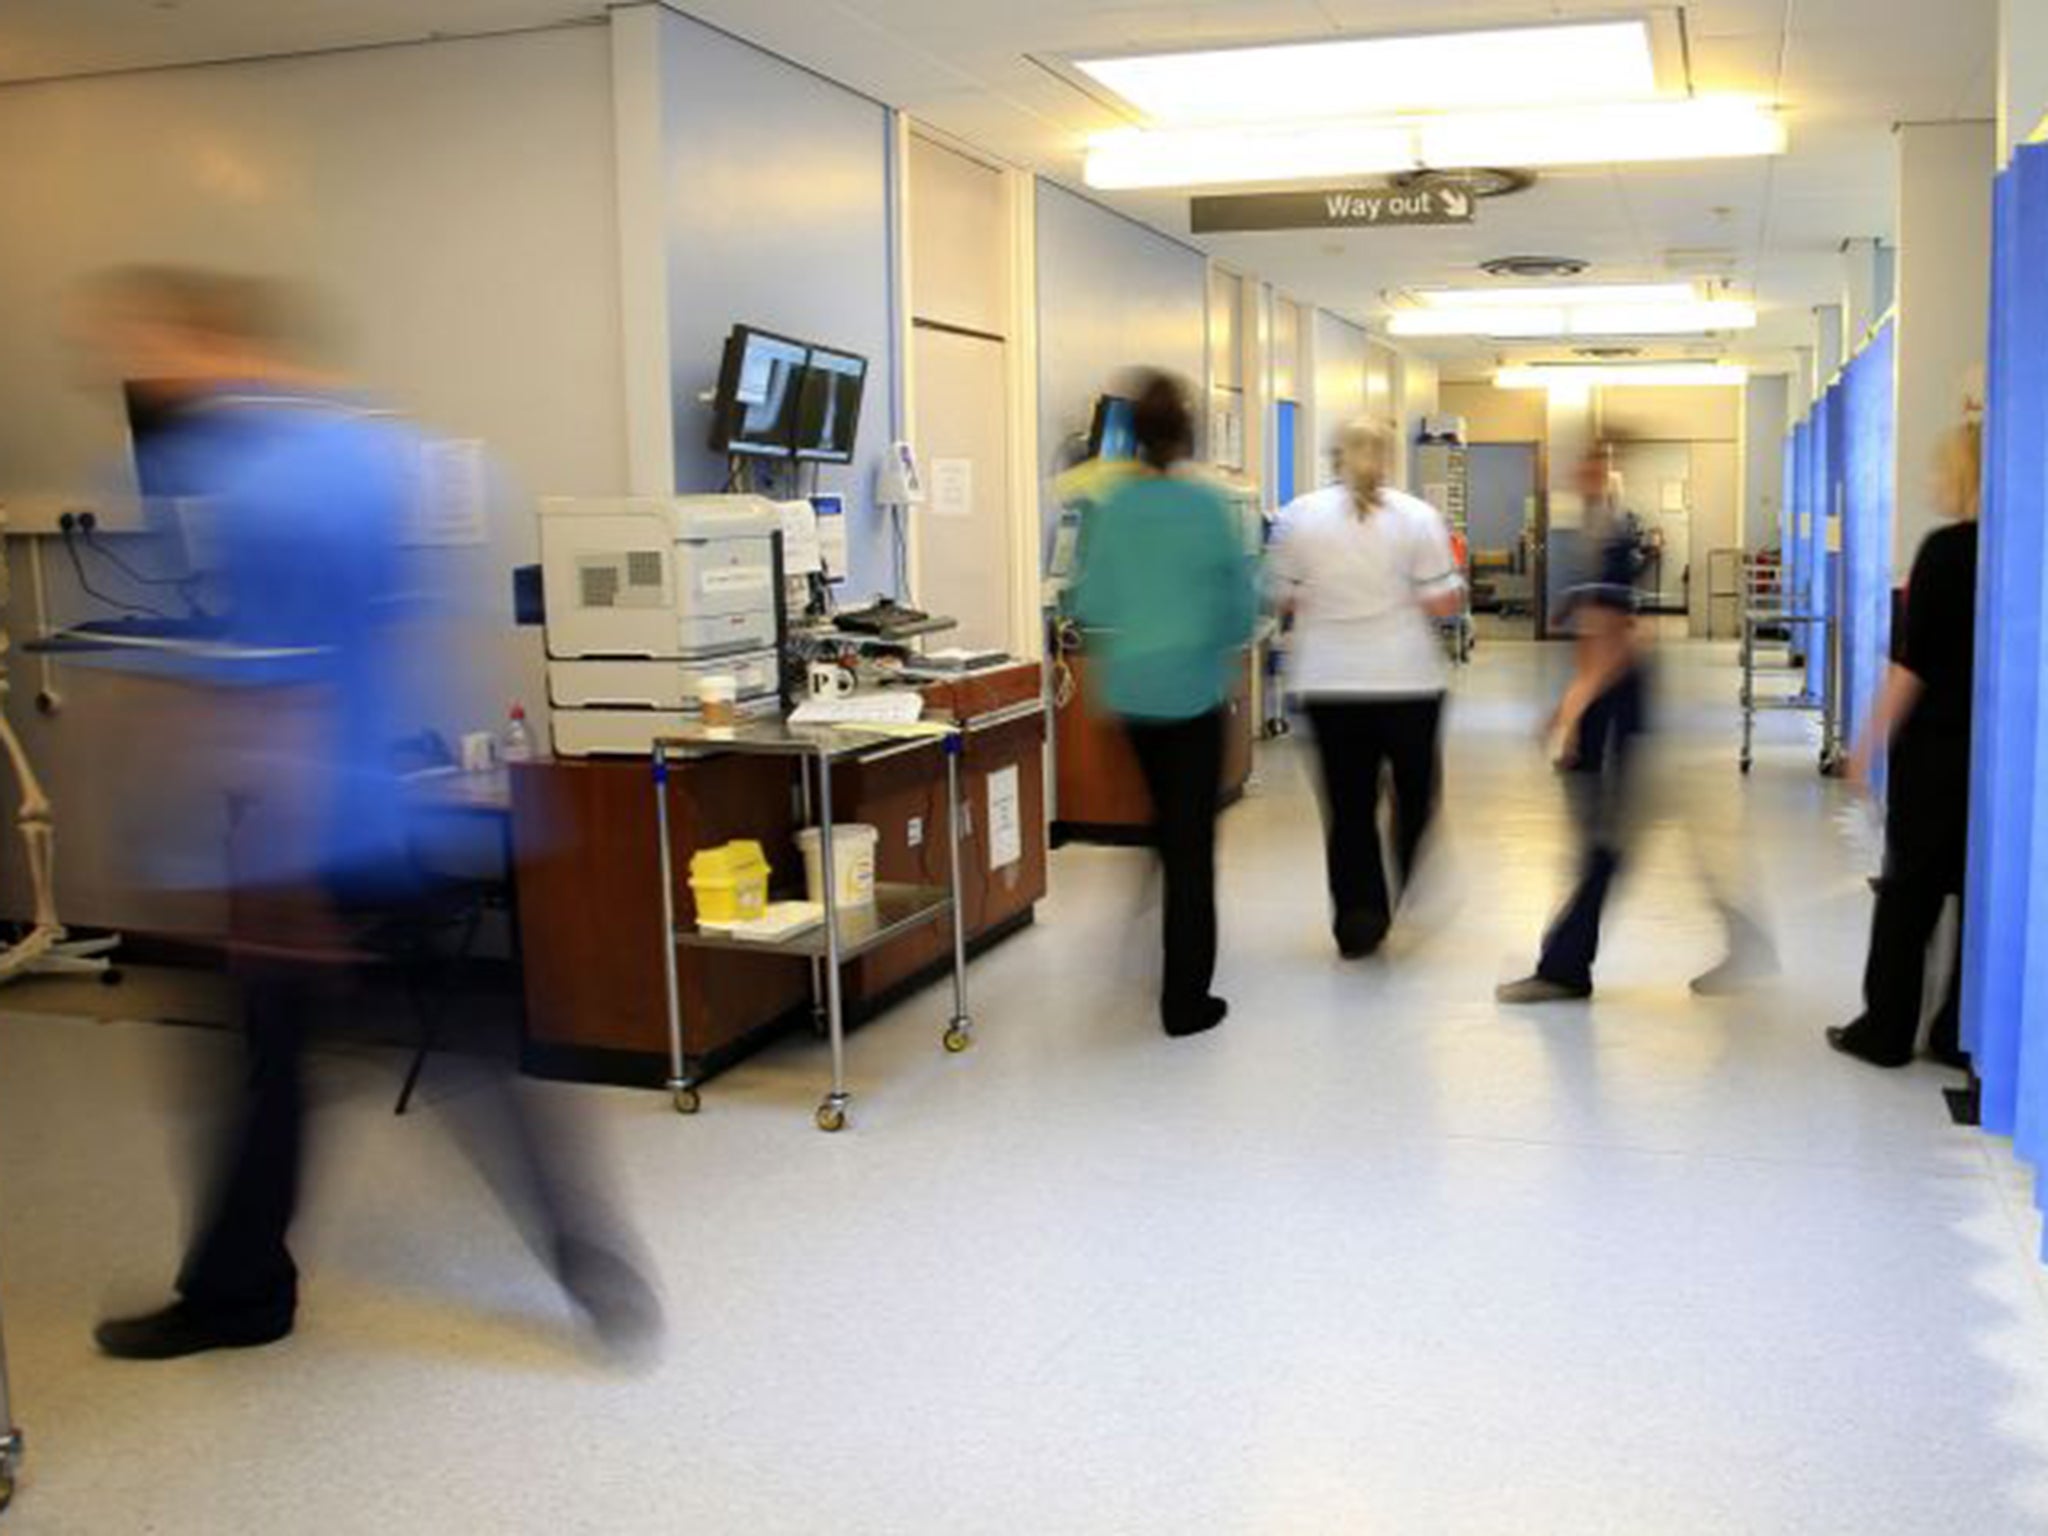 Labour has been screaming about NHS cuts and privatisation for months